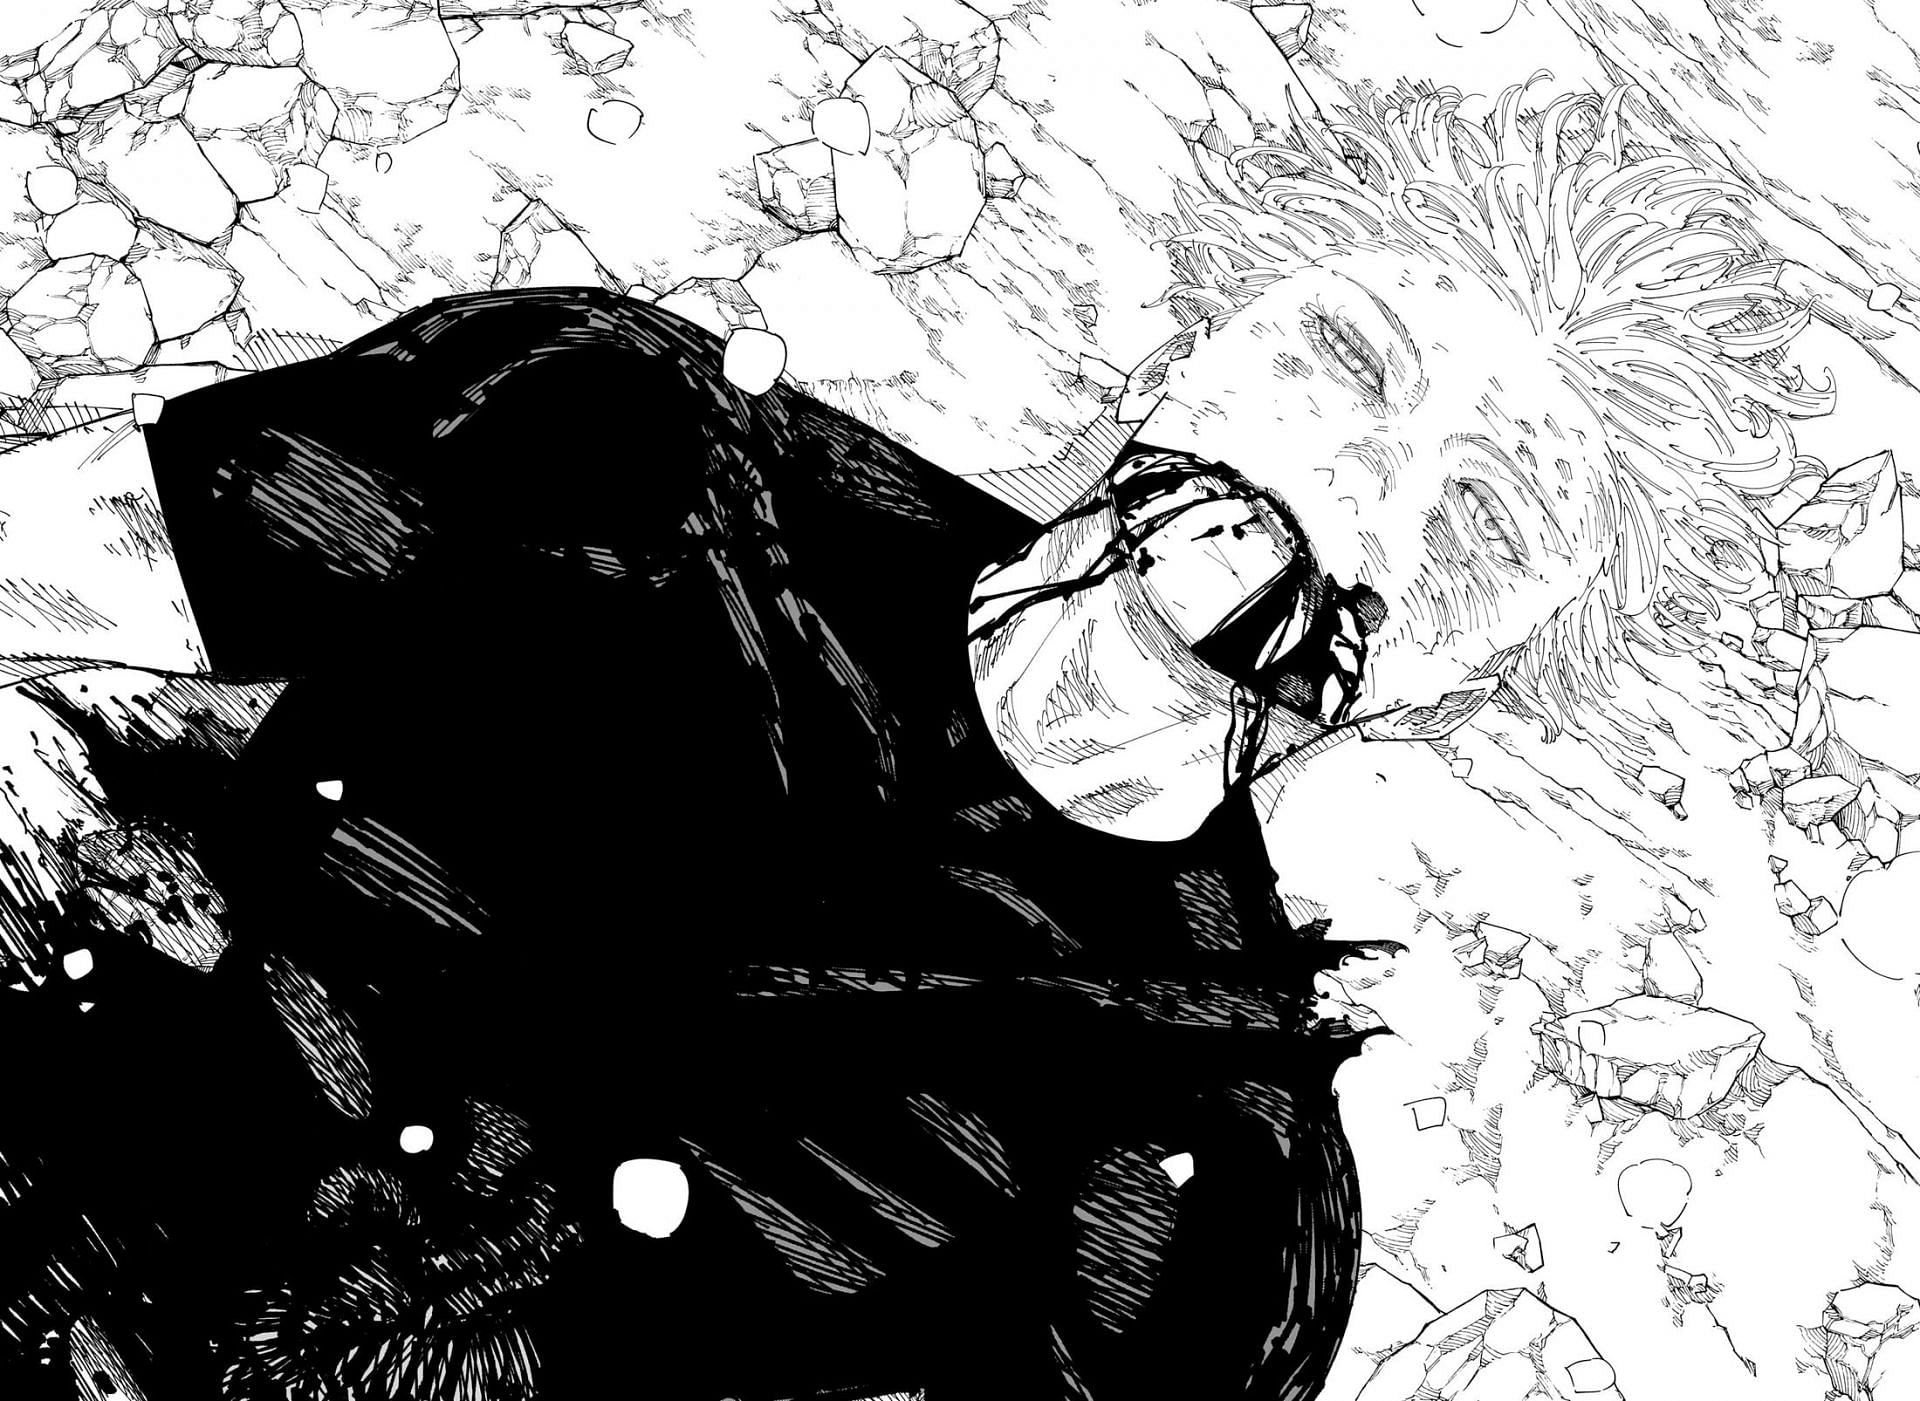 Jujutsu Kaisen Chapter 238: Jujutsu Kaisen Chapter 238: A game-changing  death and the ominous Sukuna vs Yuji clash - The Economic Times